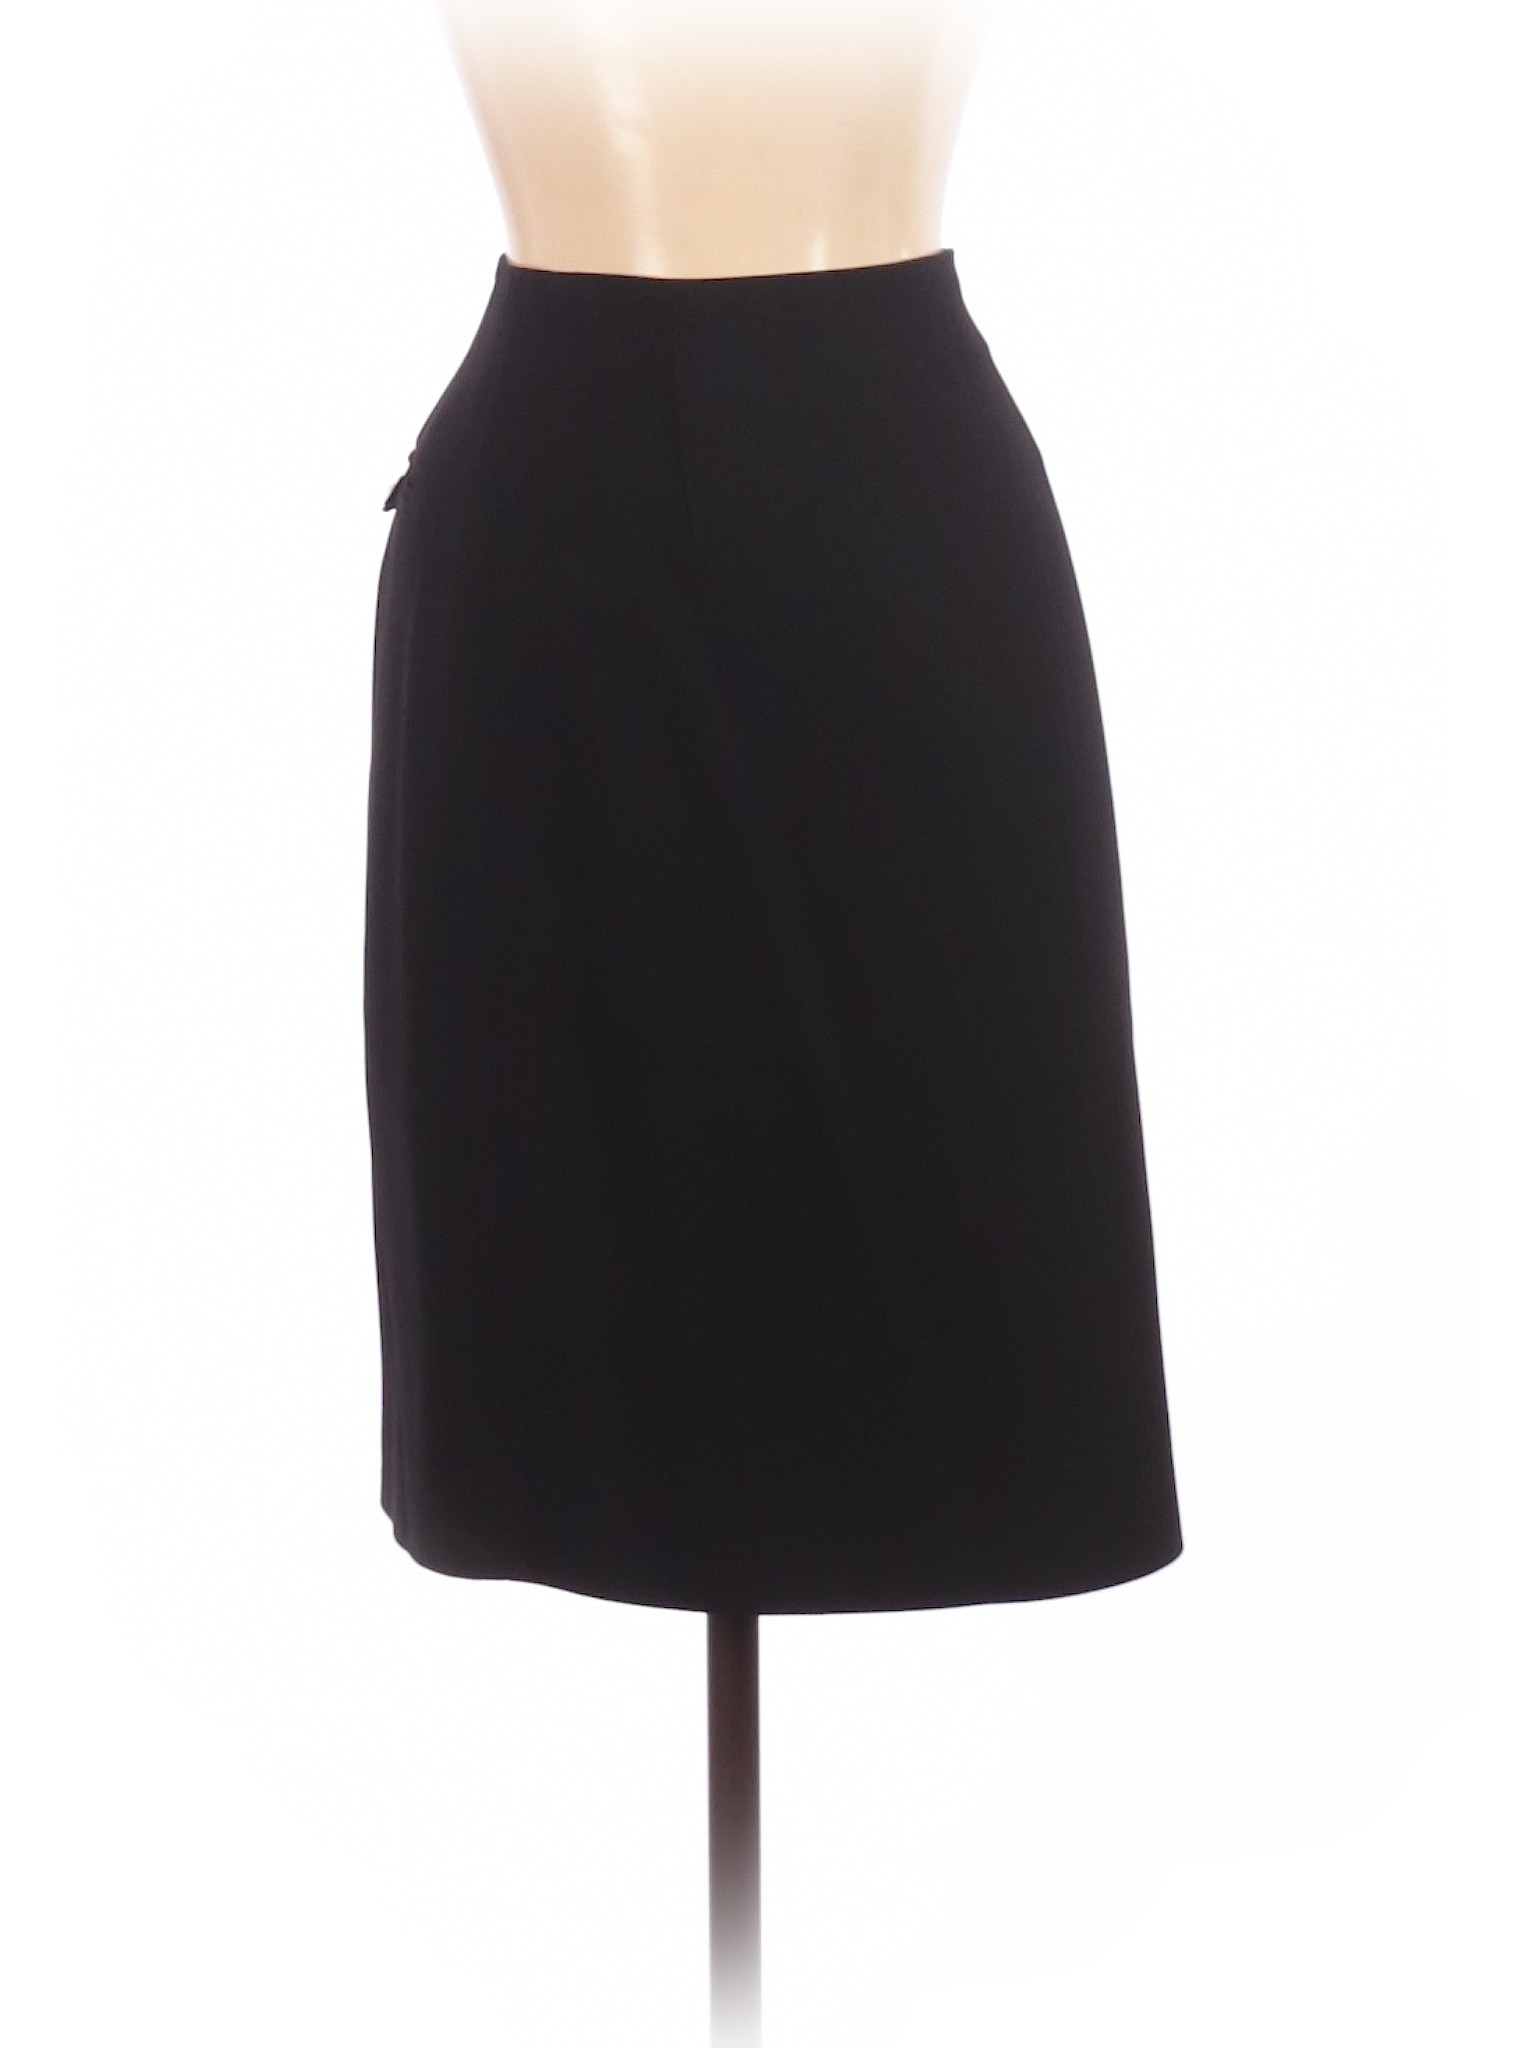 Iris Singer Collection Solid Black Casual Skirt Size 4 - 86% off | thredUP